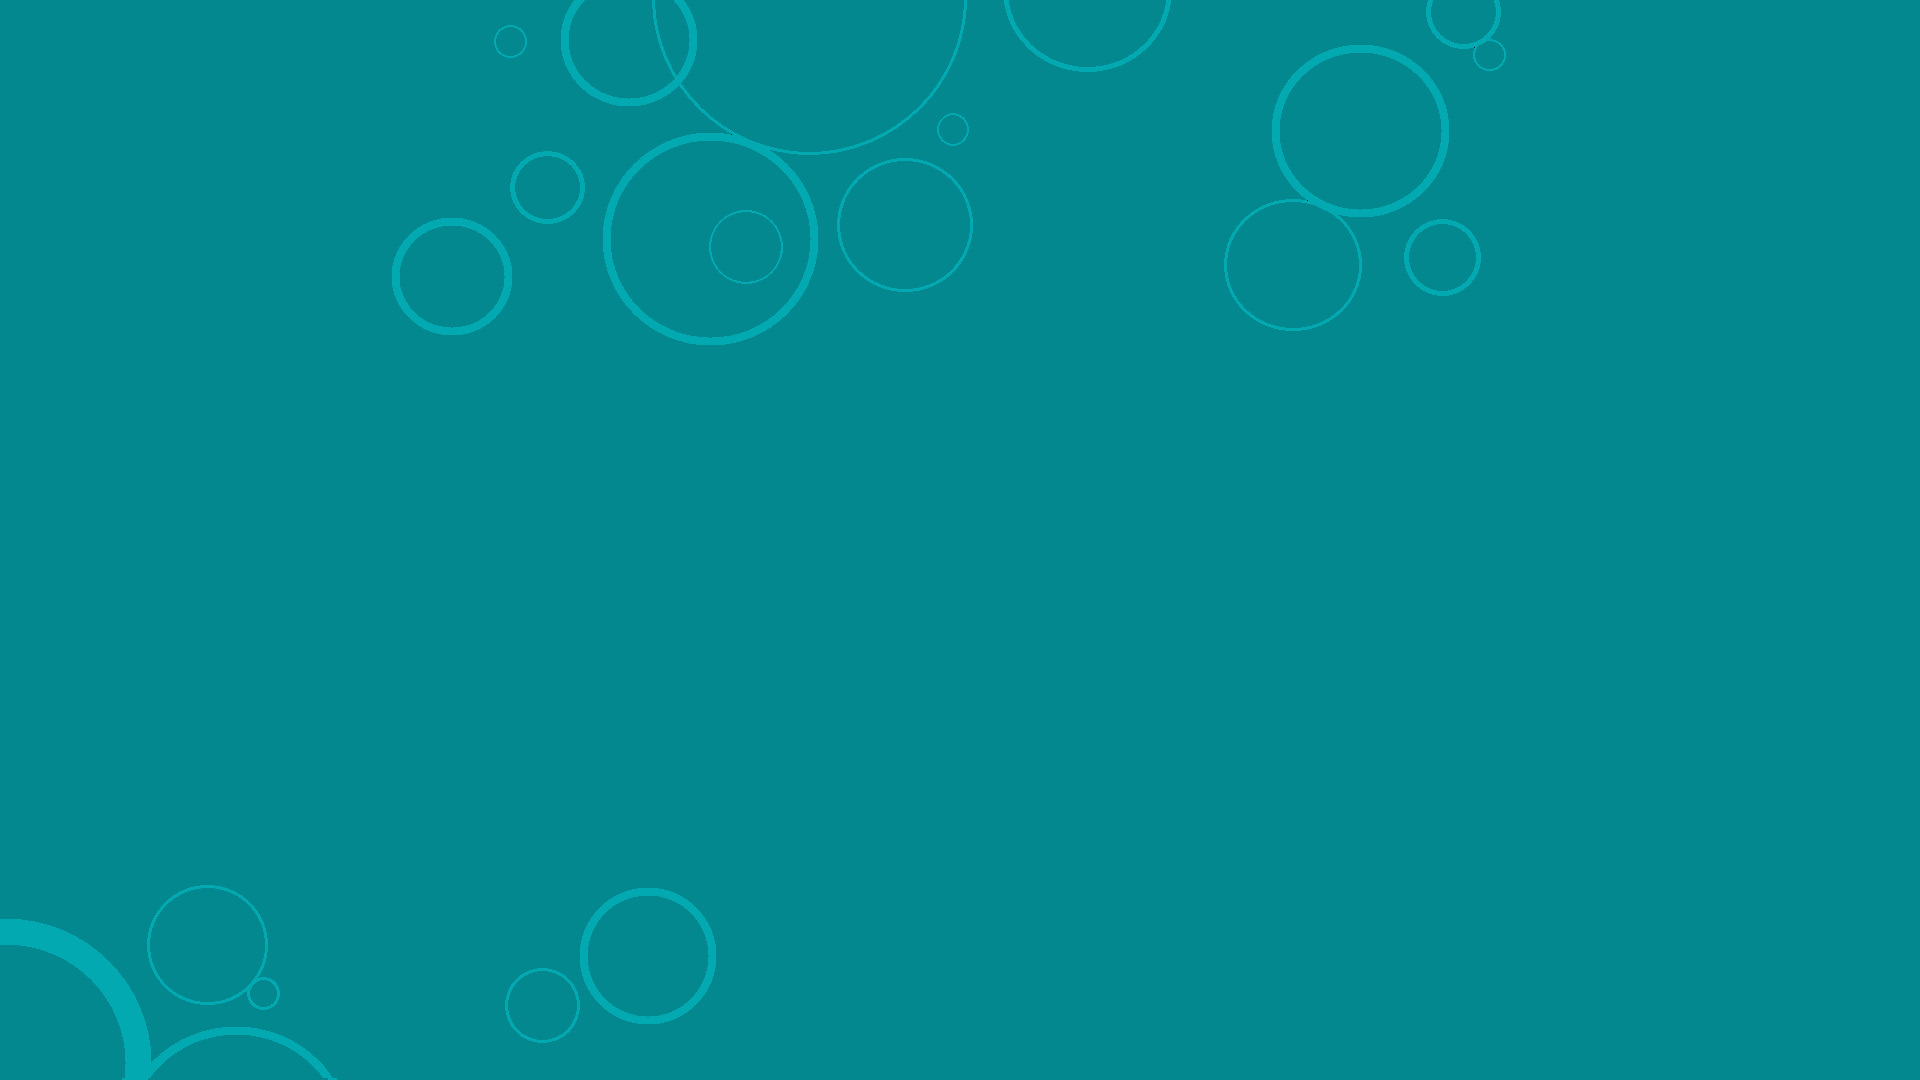 Another Turquoise Windows 8 Background